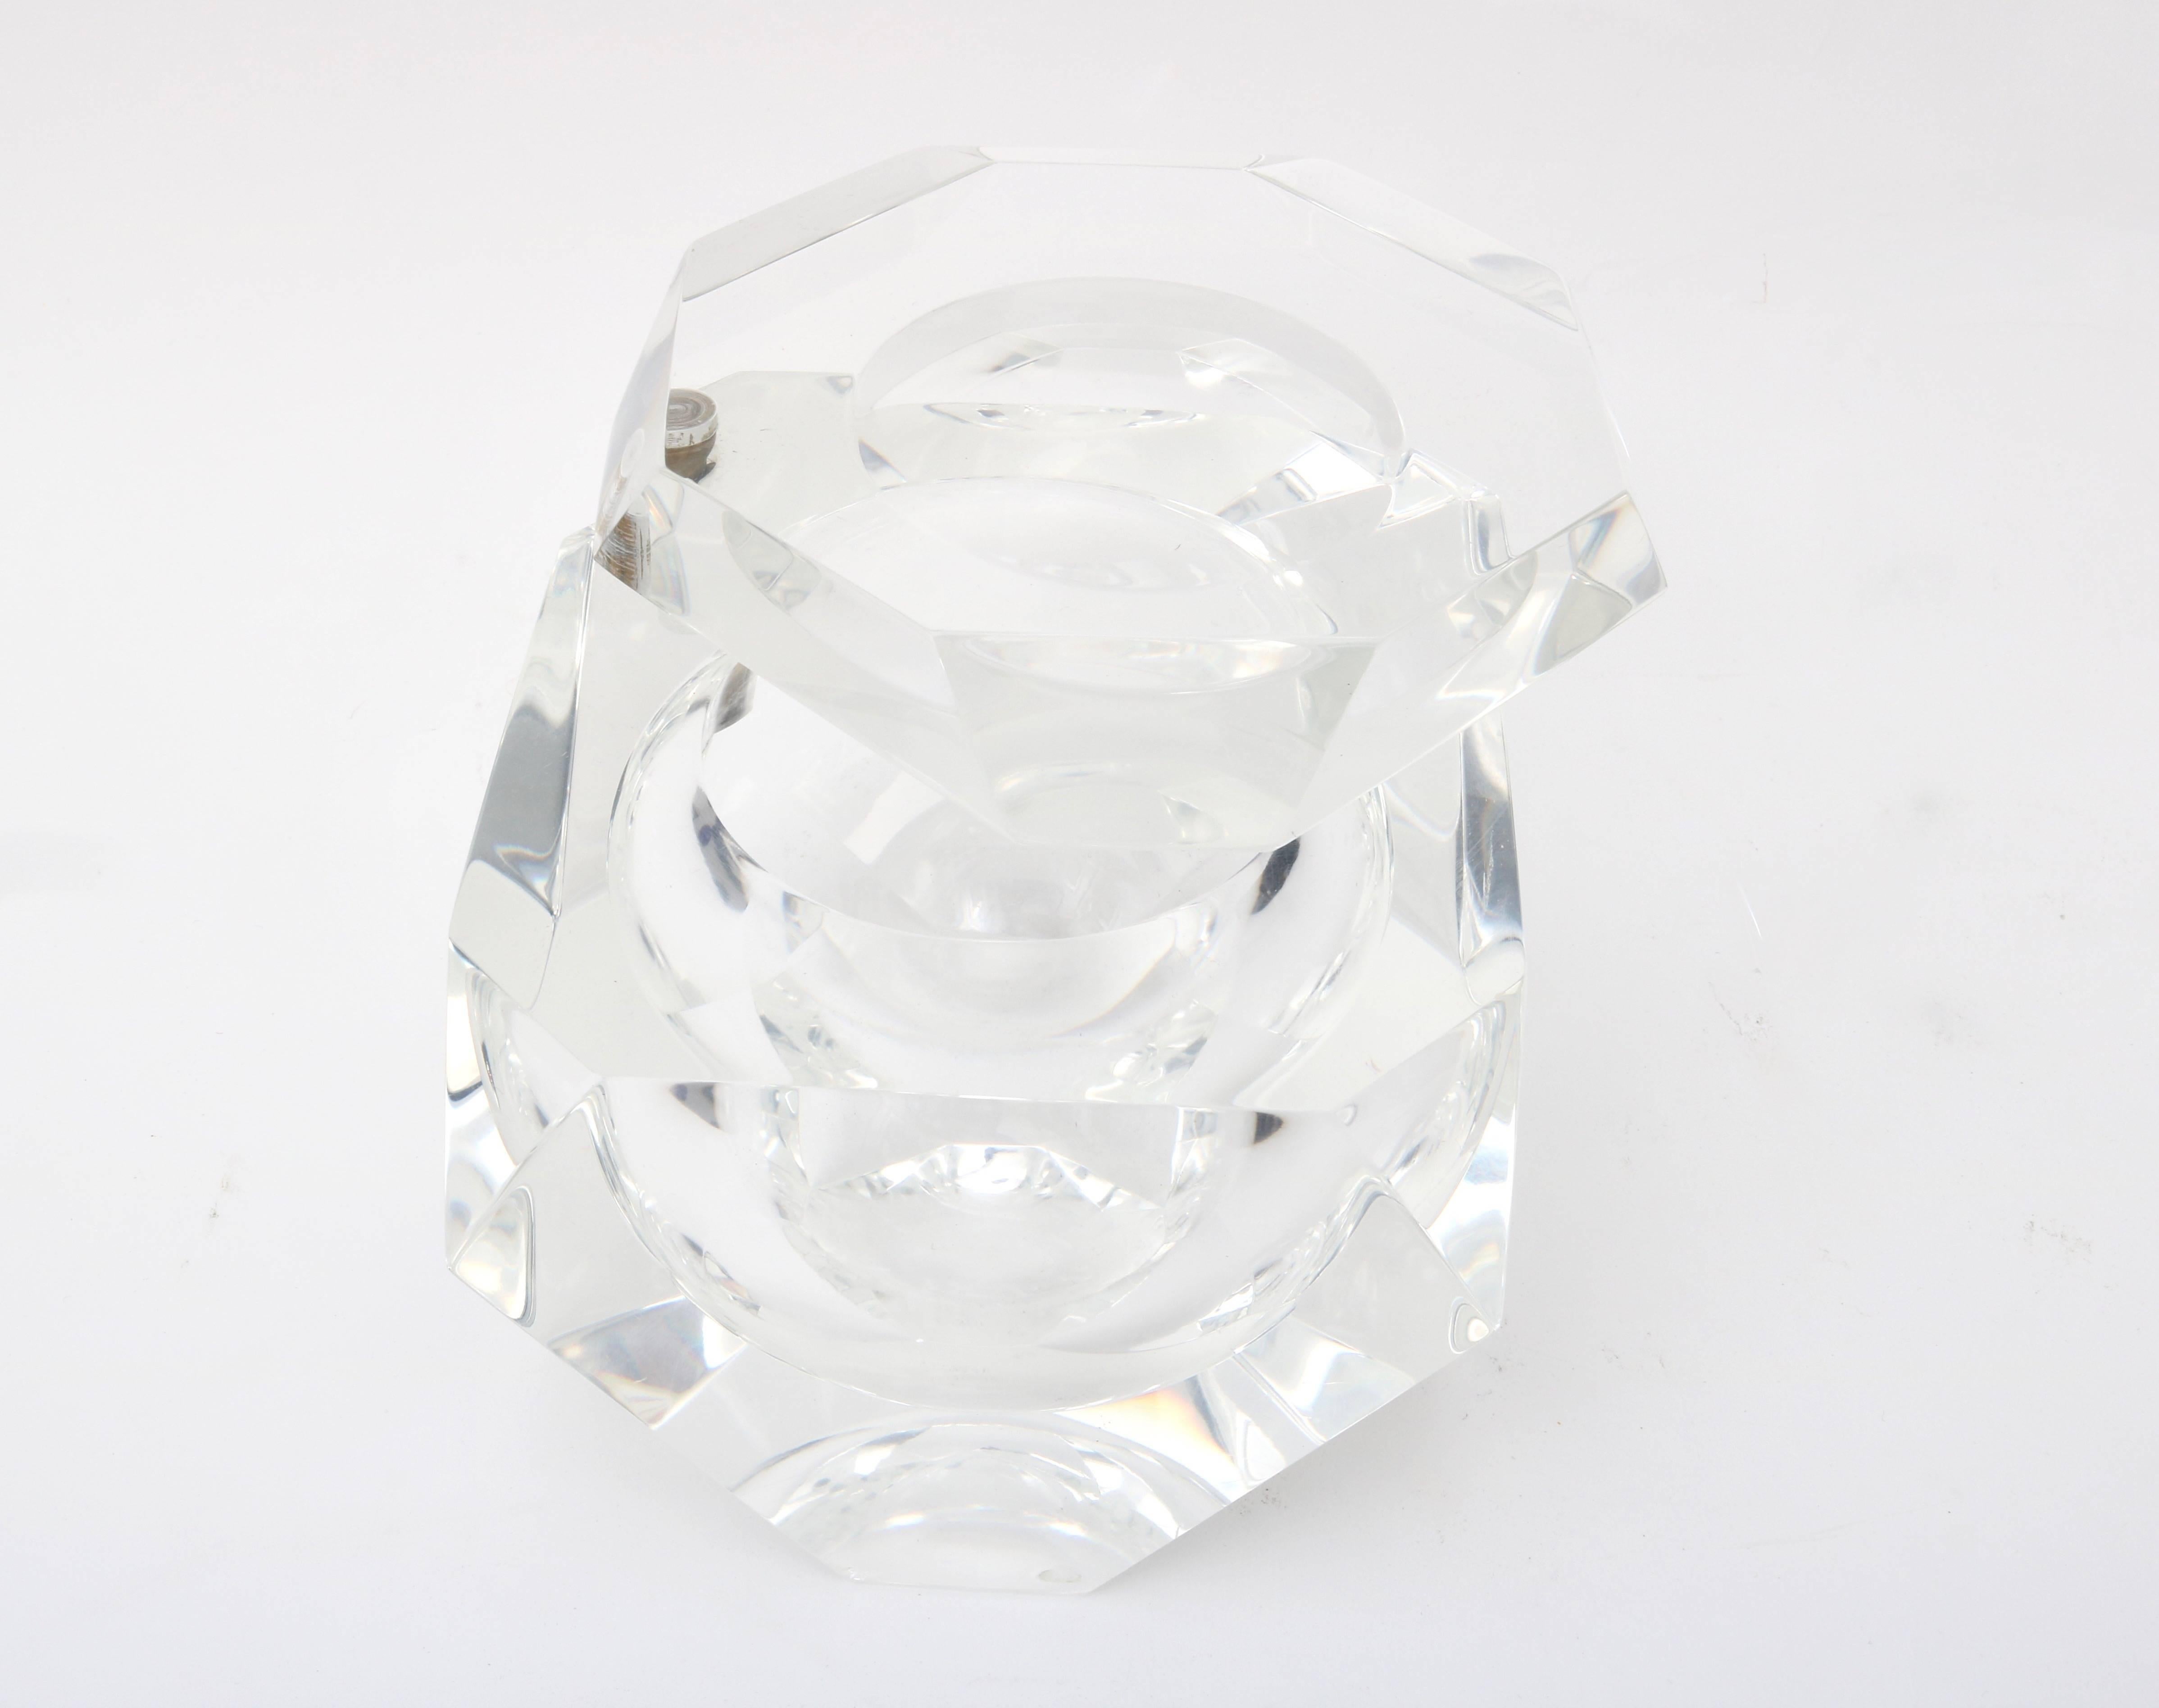 This stylish ice bucket was originally purchased at the Alessandro Albrizzi shop in Palm Beach sometime in the 1970s. It is the perfect size for two and its faceted gemlike shape catches the light beautifully.

The pivoting top makes for ease of